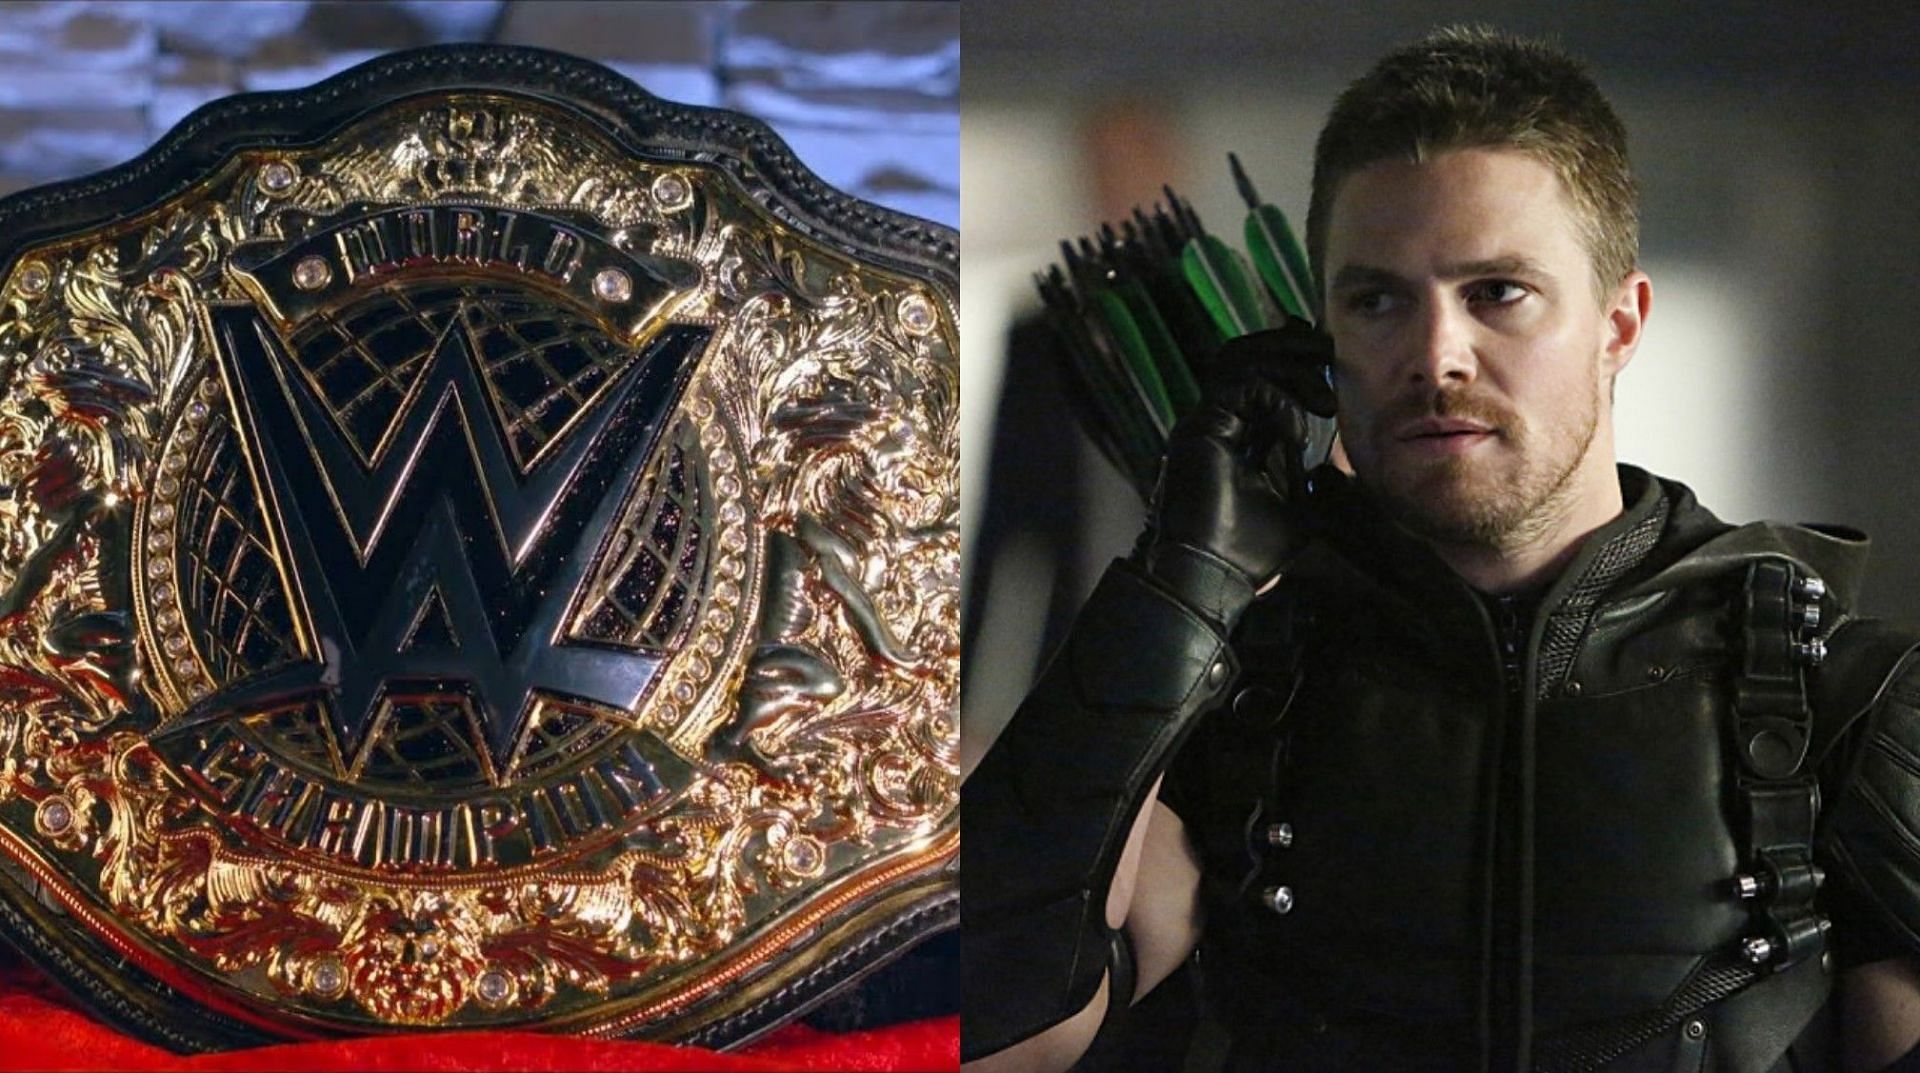 Stephen Amell is among top celebrities to have dipped their toes in pro wrestling